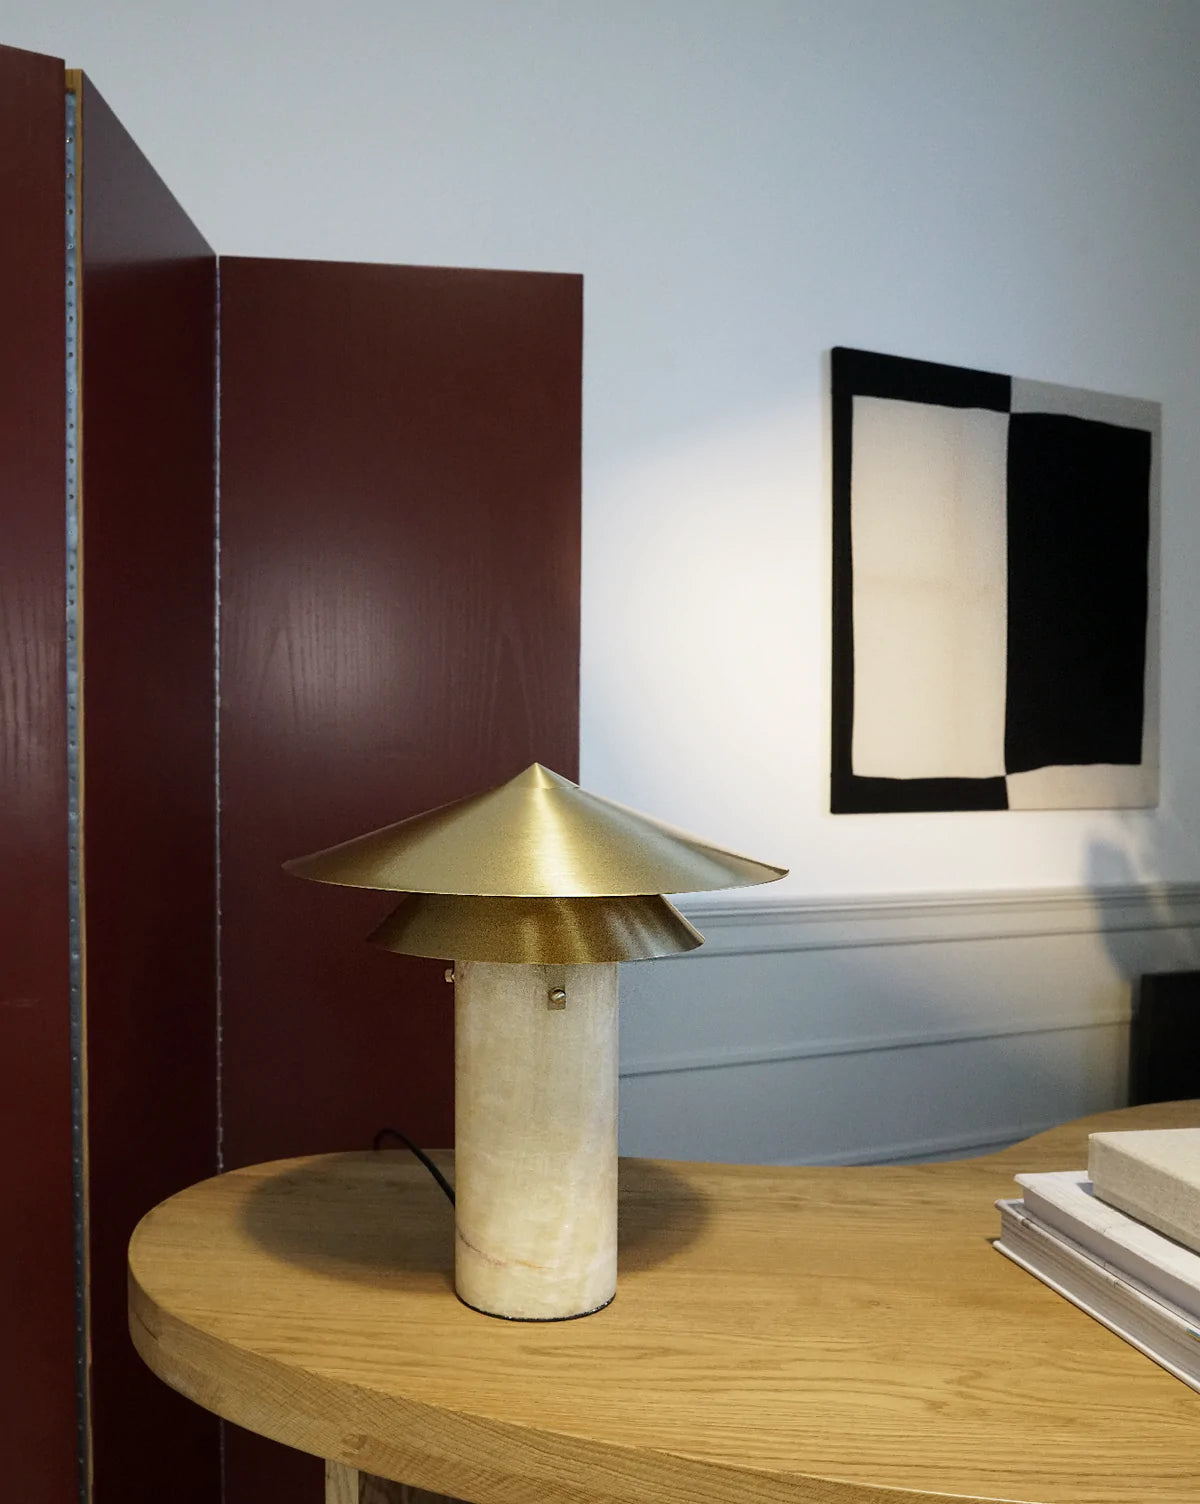 Meconopsis Onyx Table Lamp